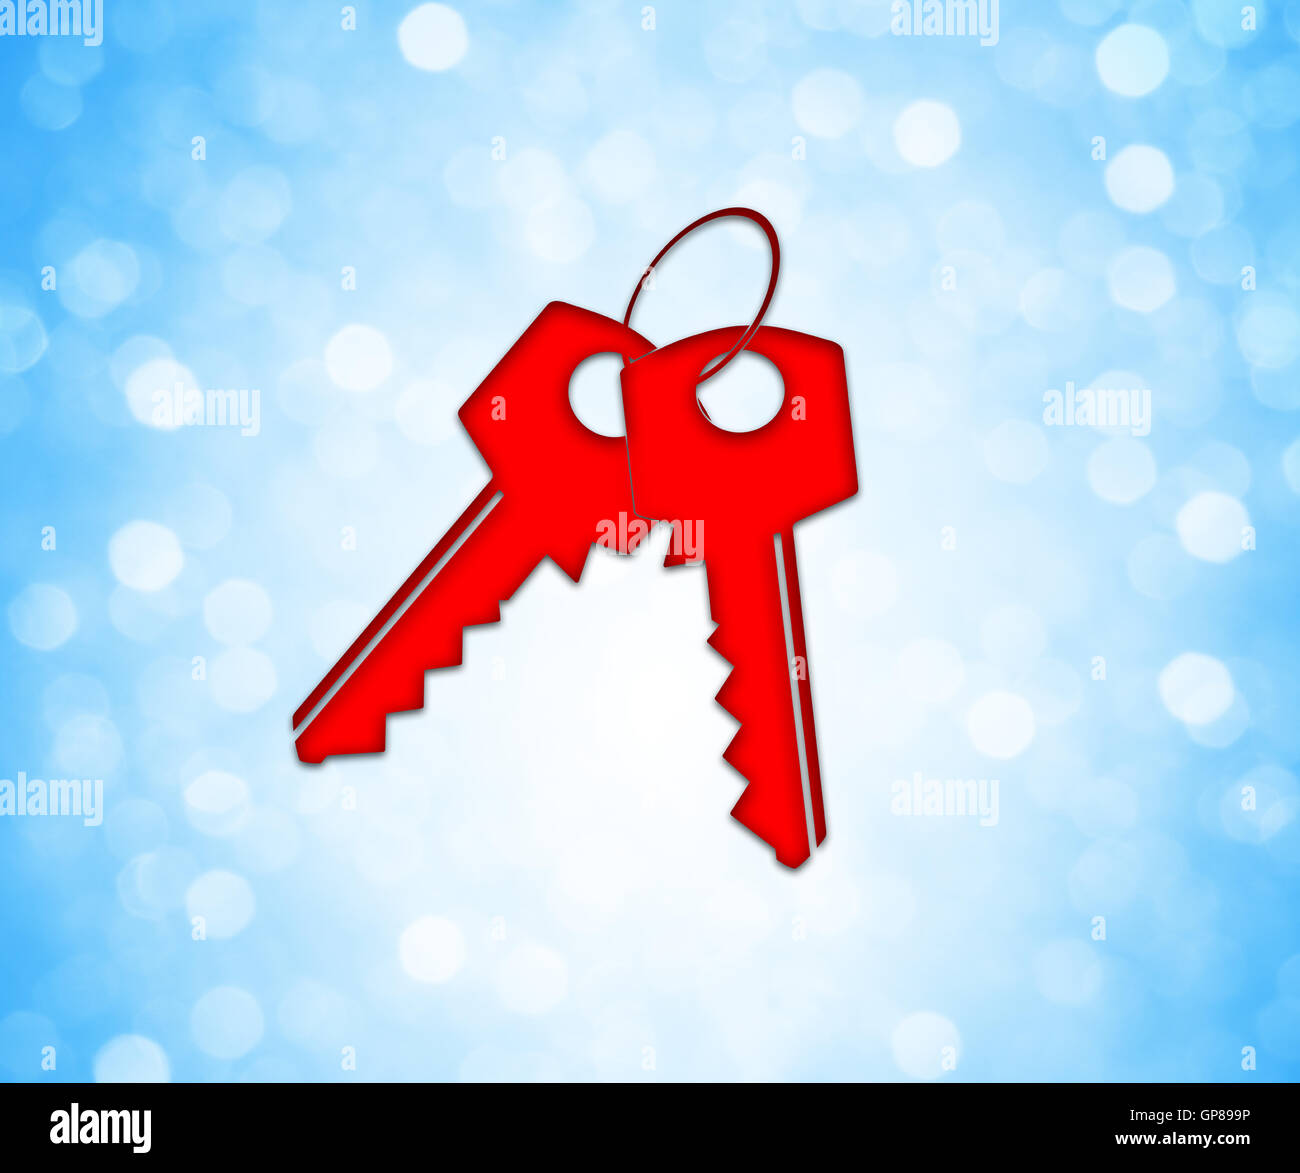 Red colored keys icon over a blue bokeh background Stock Photo